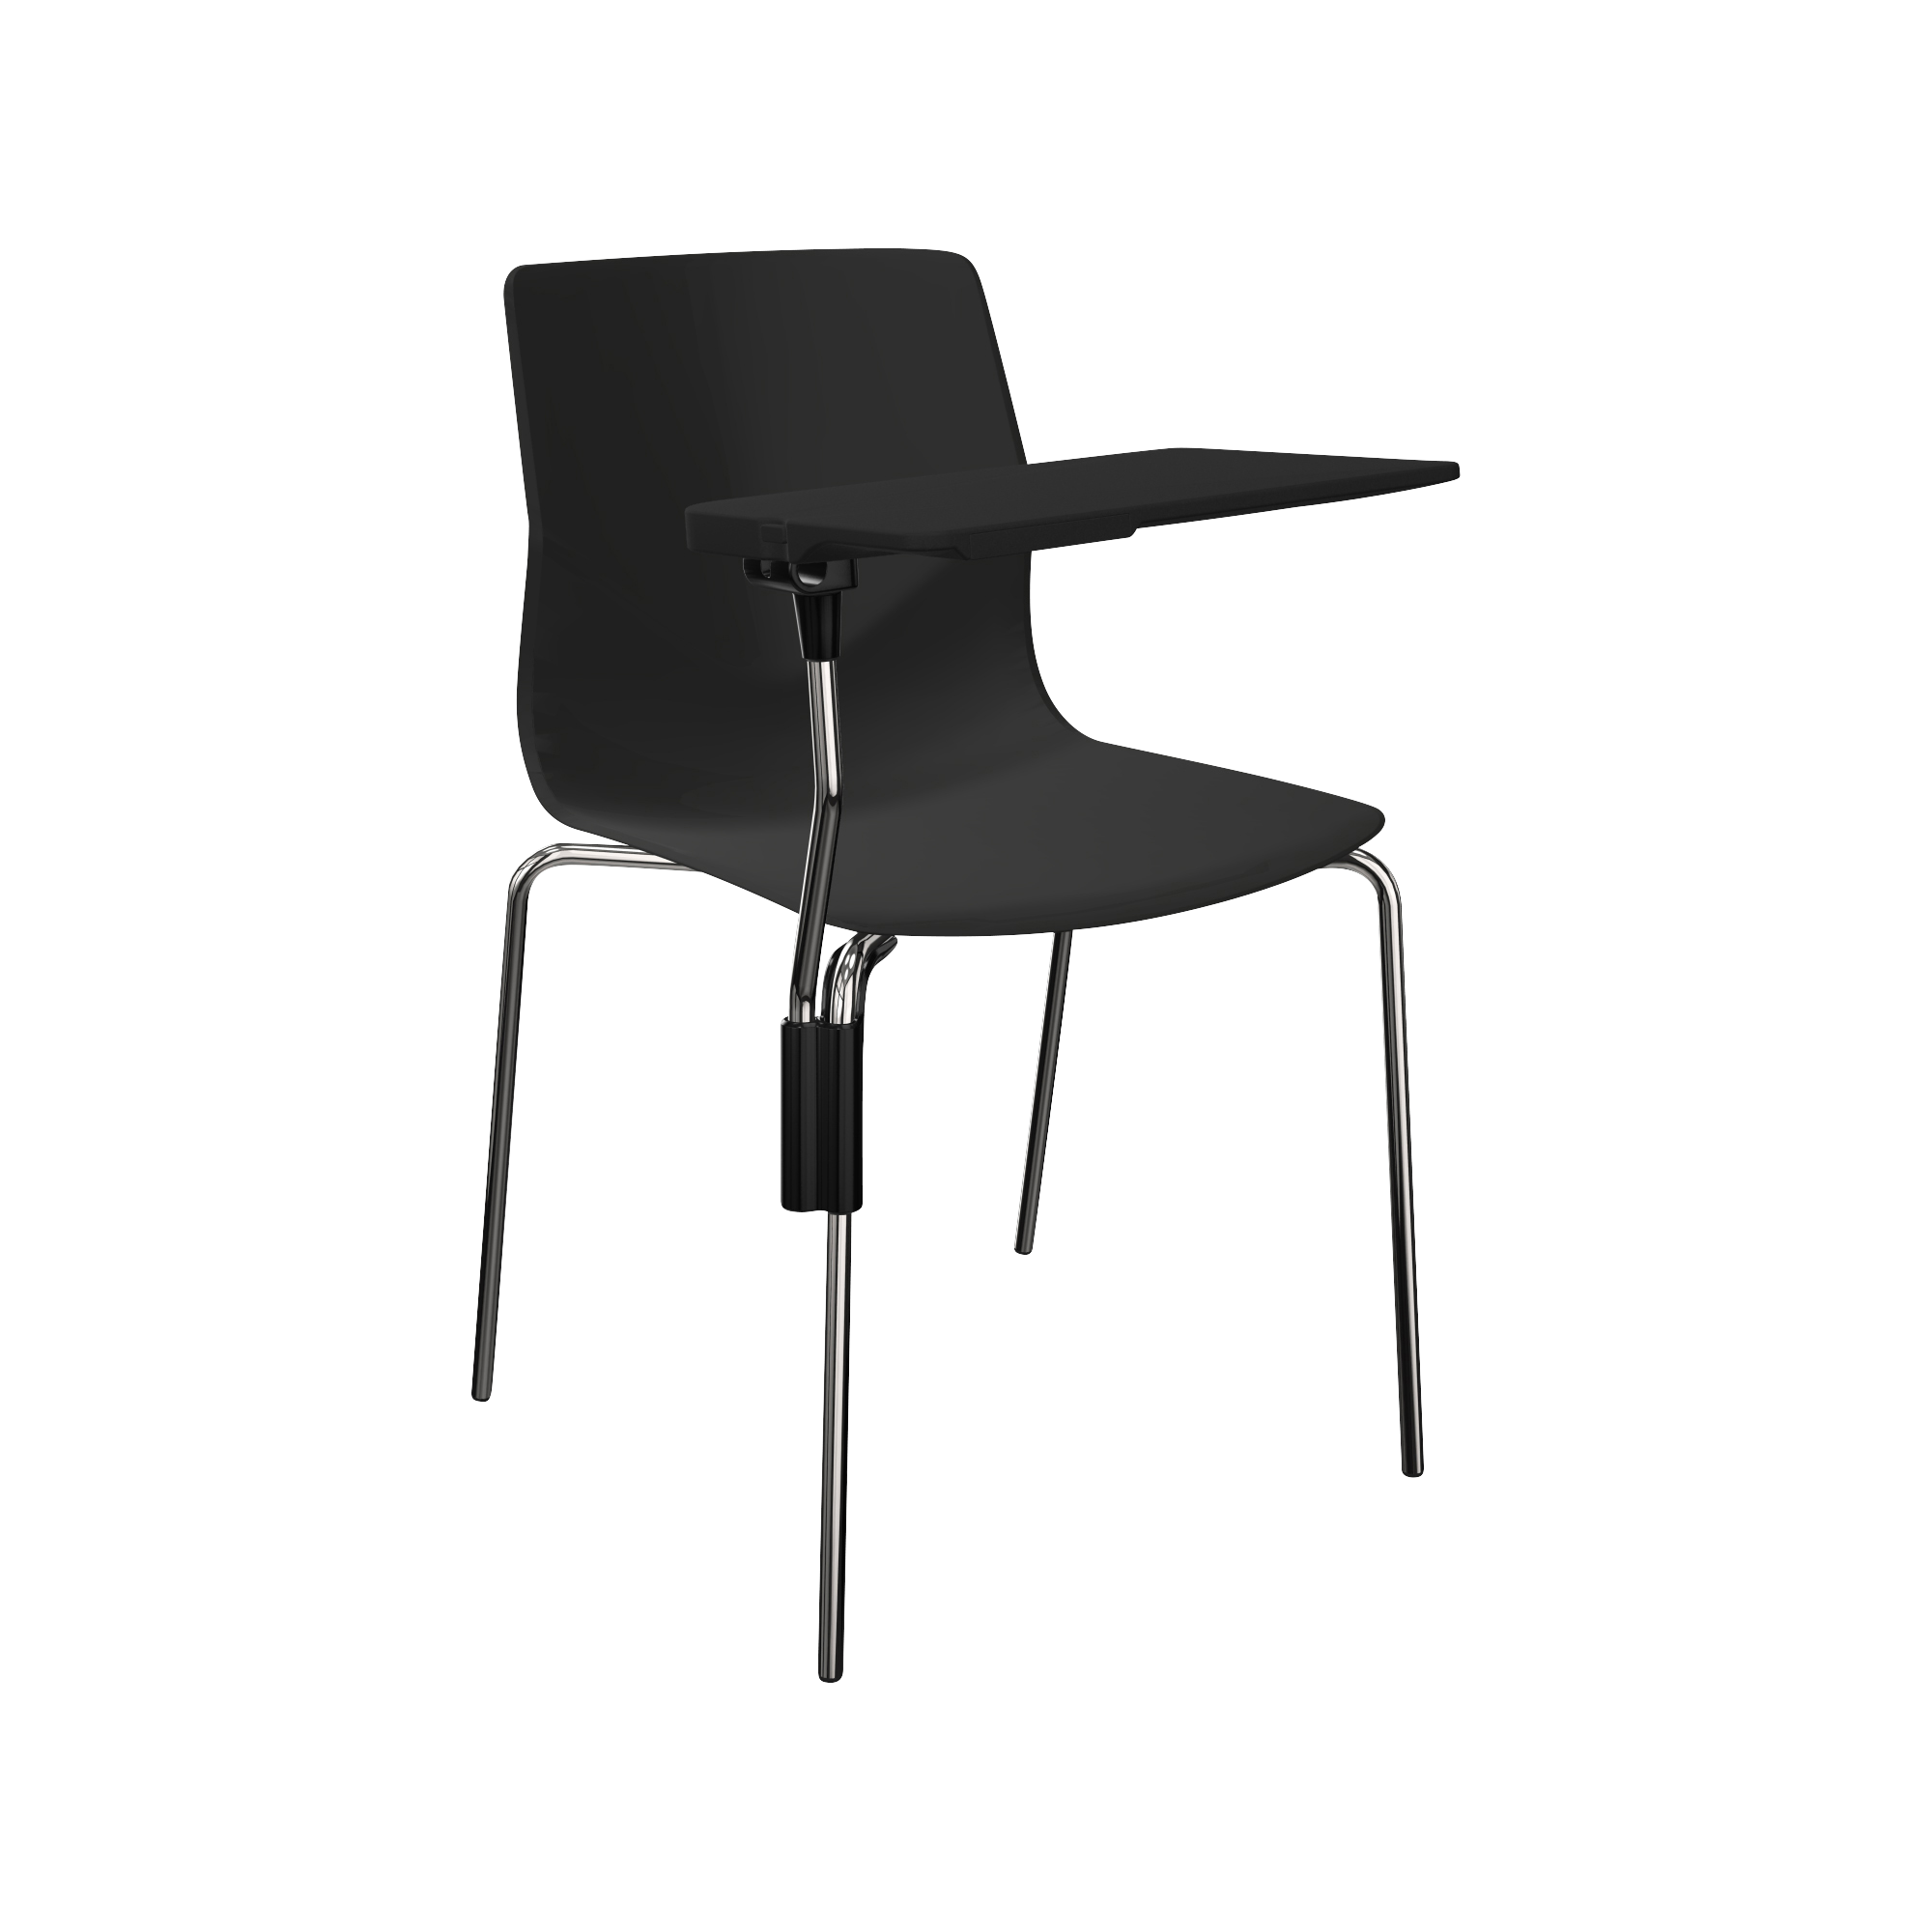 A black chair with a laptop table on it